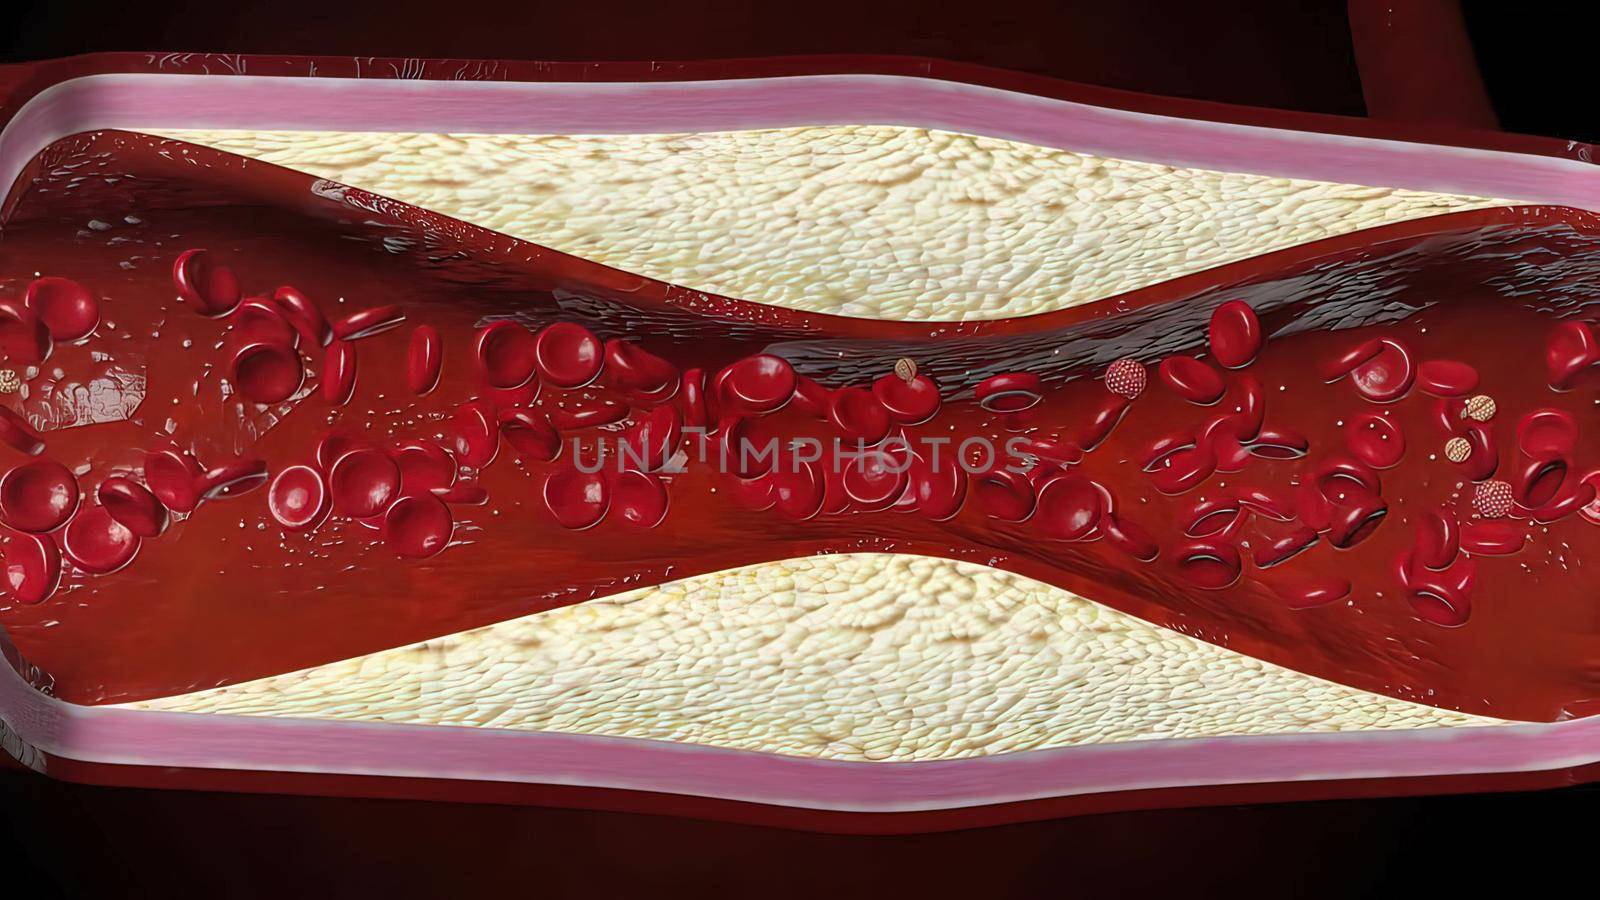 Atherosclerosis with cholesterol blood or plaque in vessel cause of coronary artery disease by creativepic